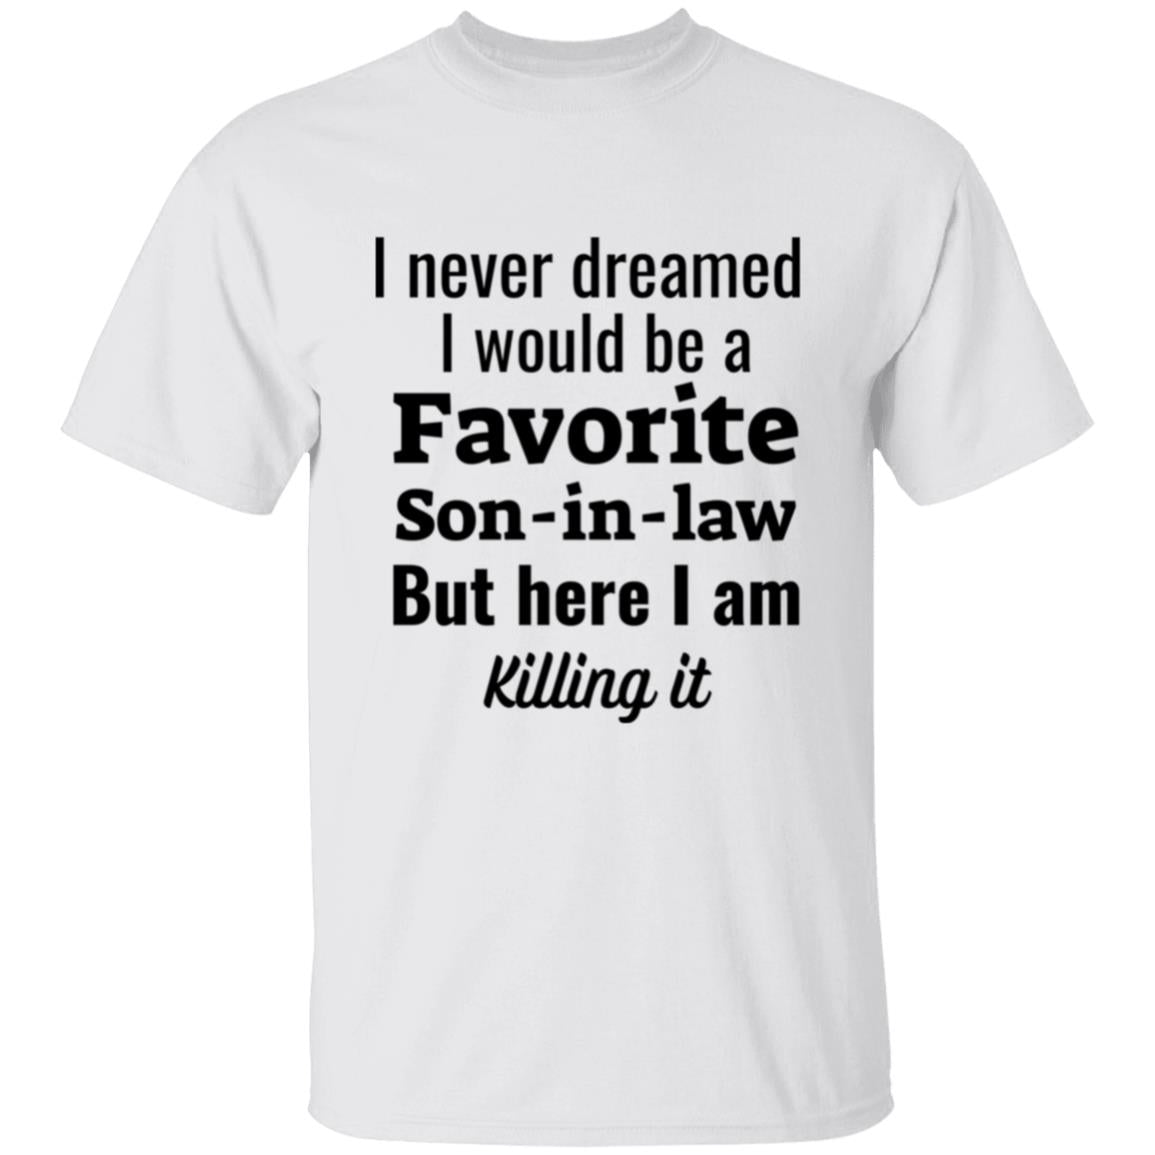 Get trendy with I never dreamed Favorite Son-in-law Front Print T-Shirt - T-Shirts available at Good Gift Company. Grab yours for $22.95 today!